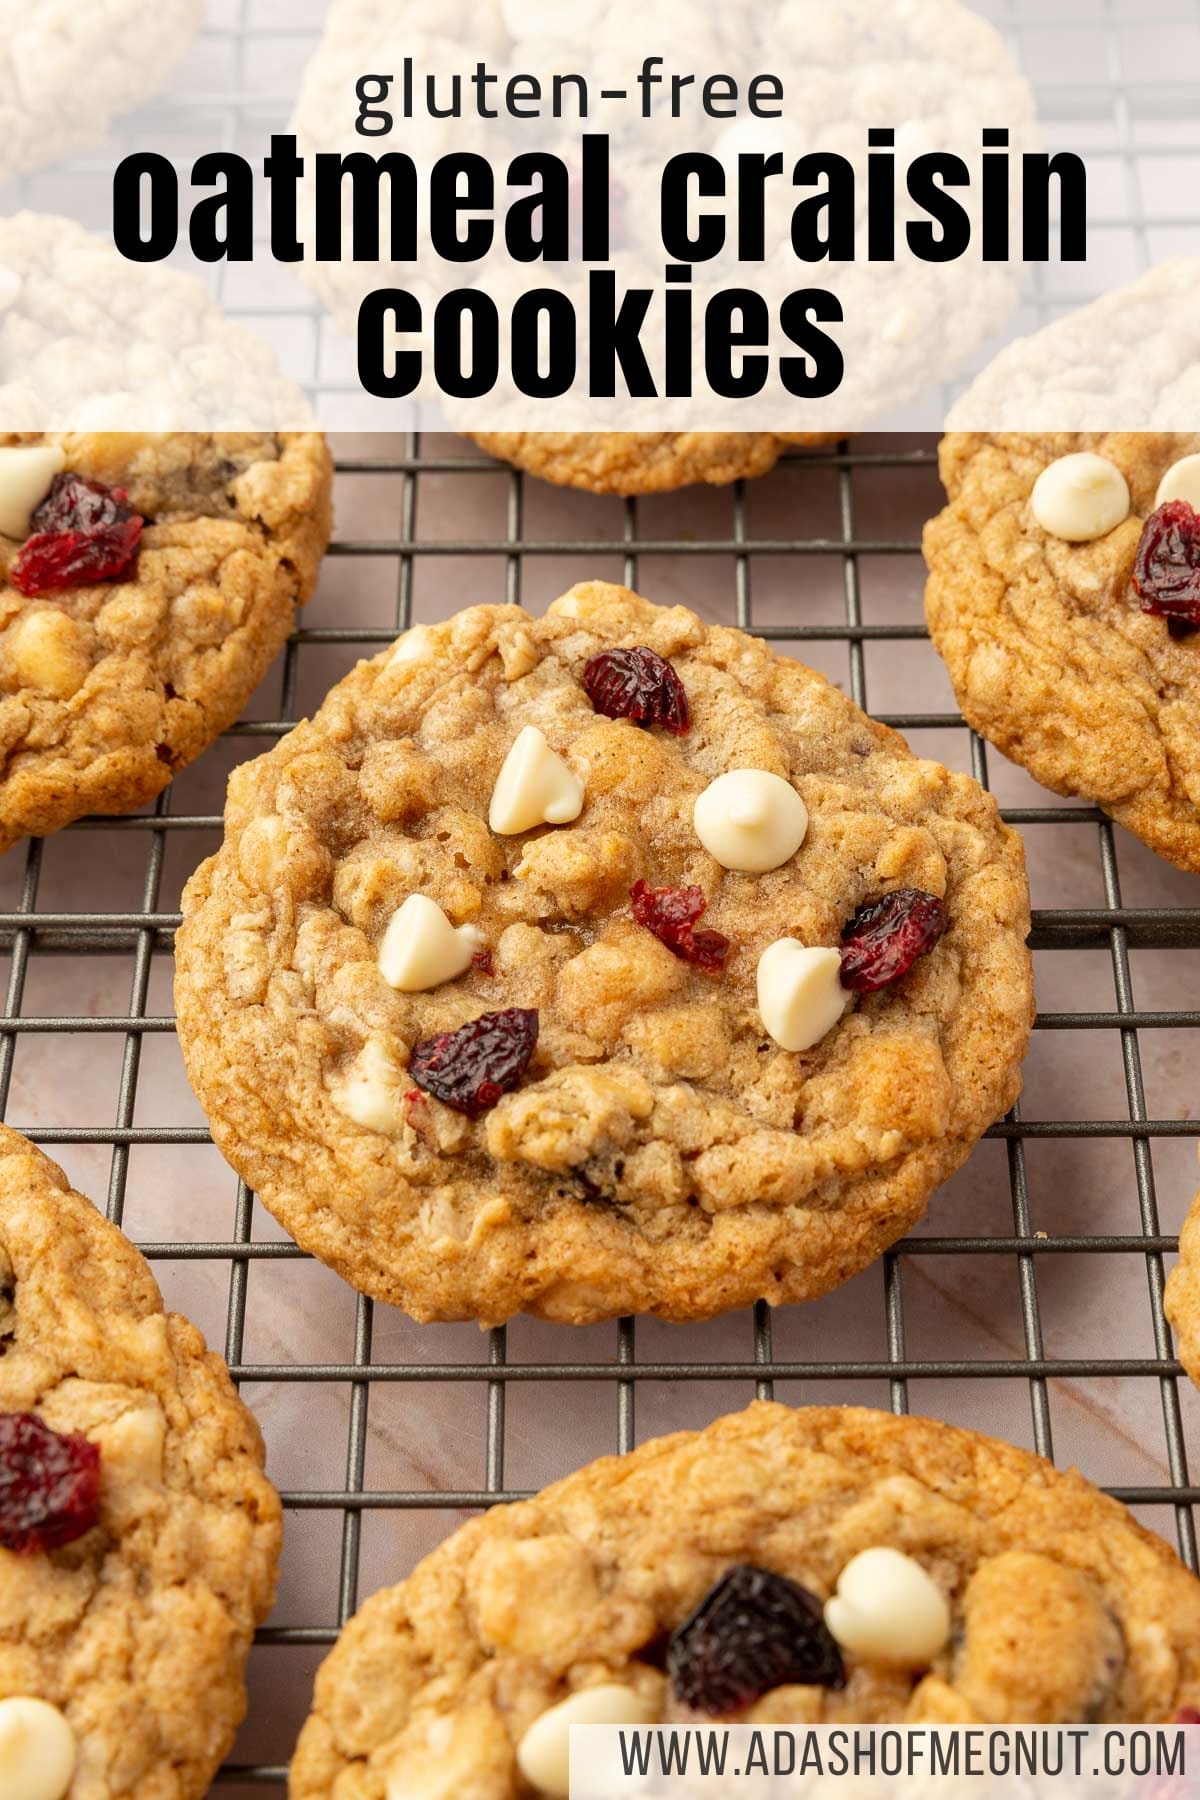 Gluten-free oatmeal white chocolate cranberry cookies cooling on a wire rack.